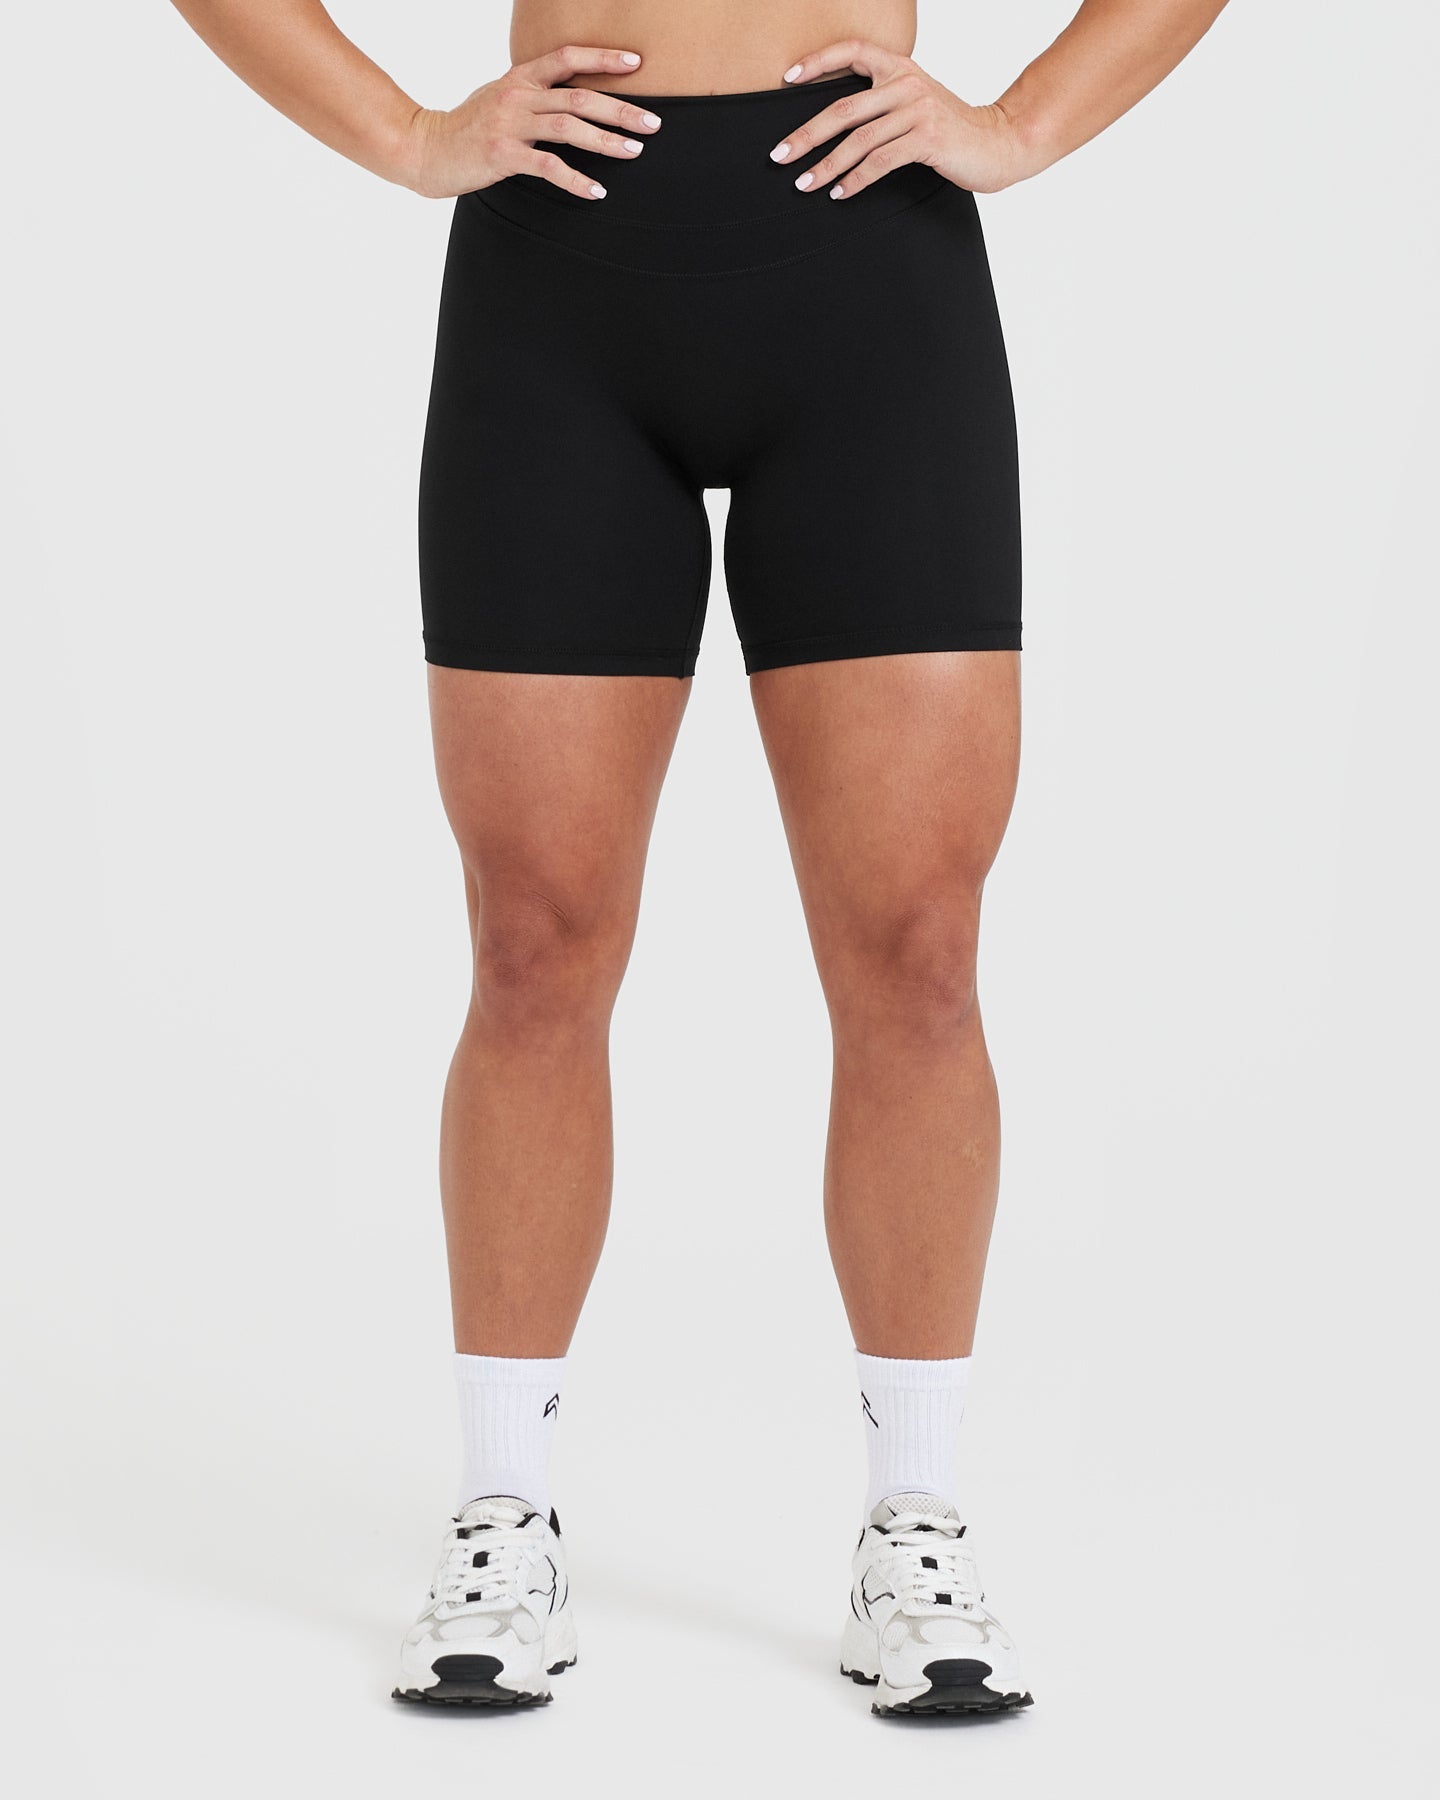 High Waisted Shaping Shorts Portable Fetal Women's Sexy 1/2 Cup